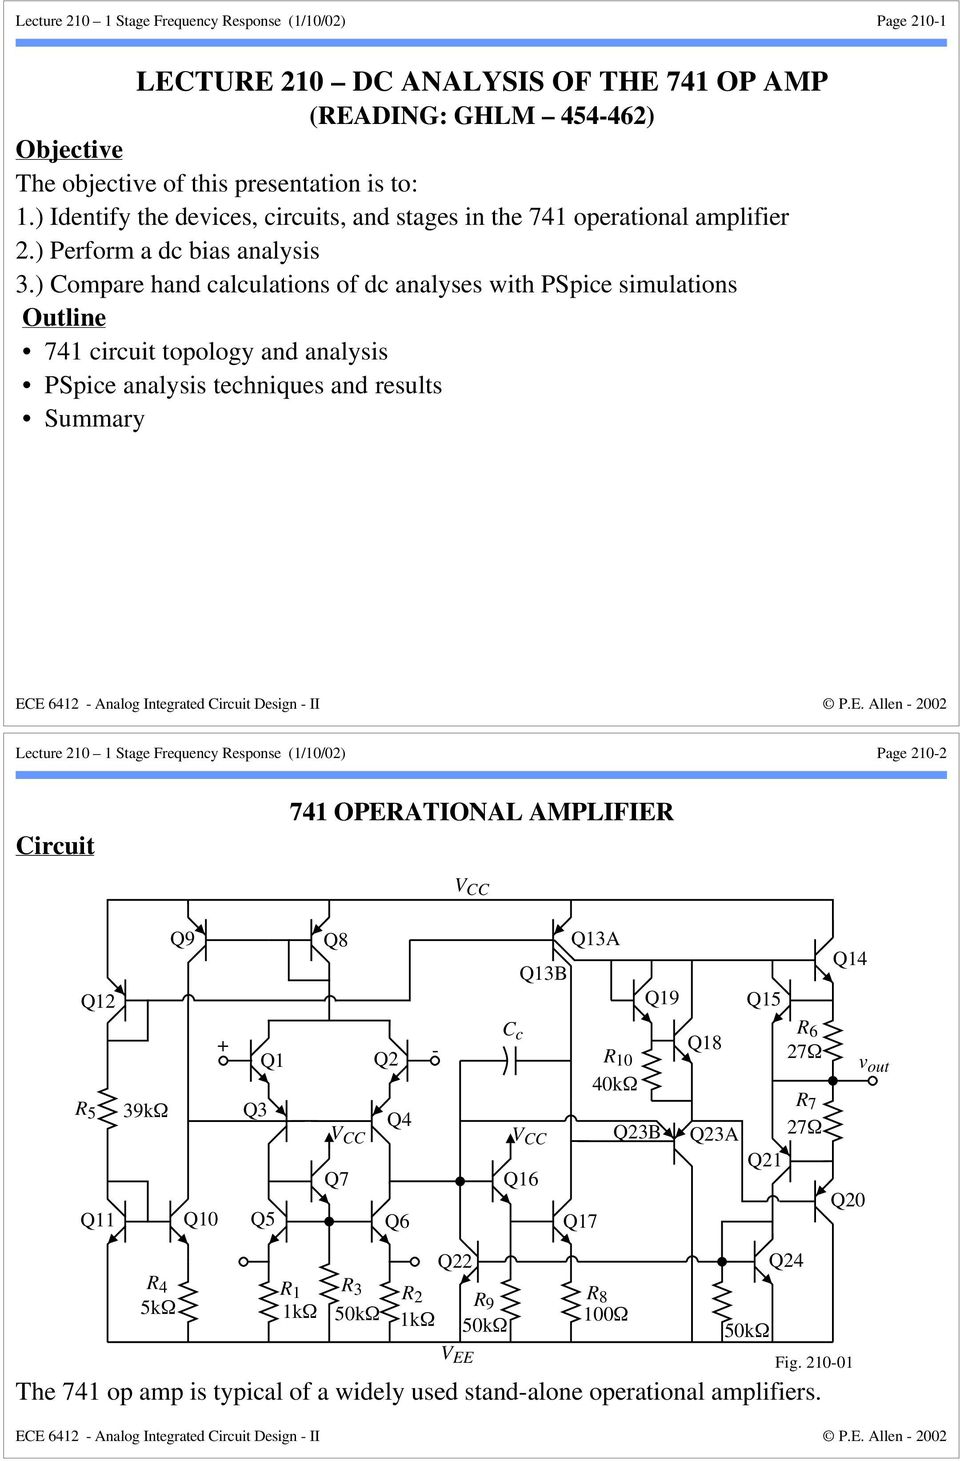 ) Compare hand calculations of dc analyses with PSpice simulations Outline 741 circuit topology and analysis PSpice analysis techniques and results Summary Lecture 210 1 Stage Frequency